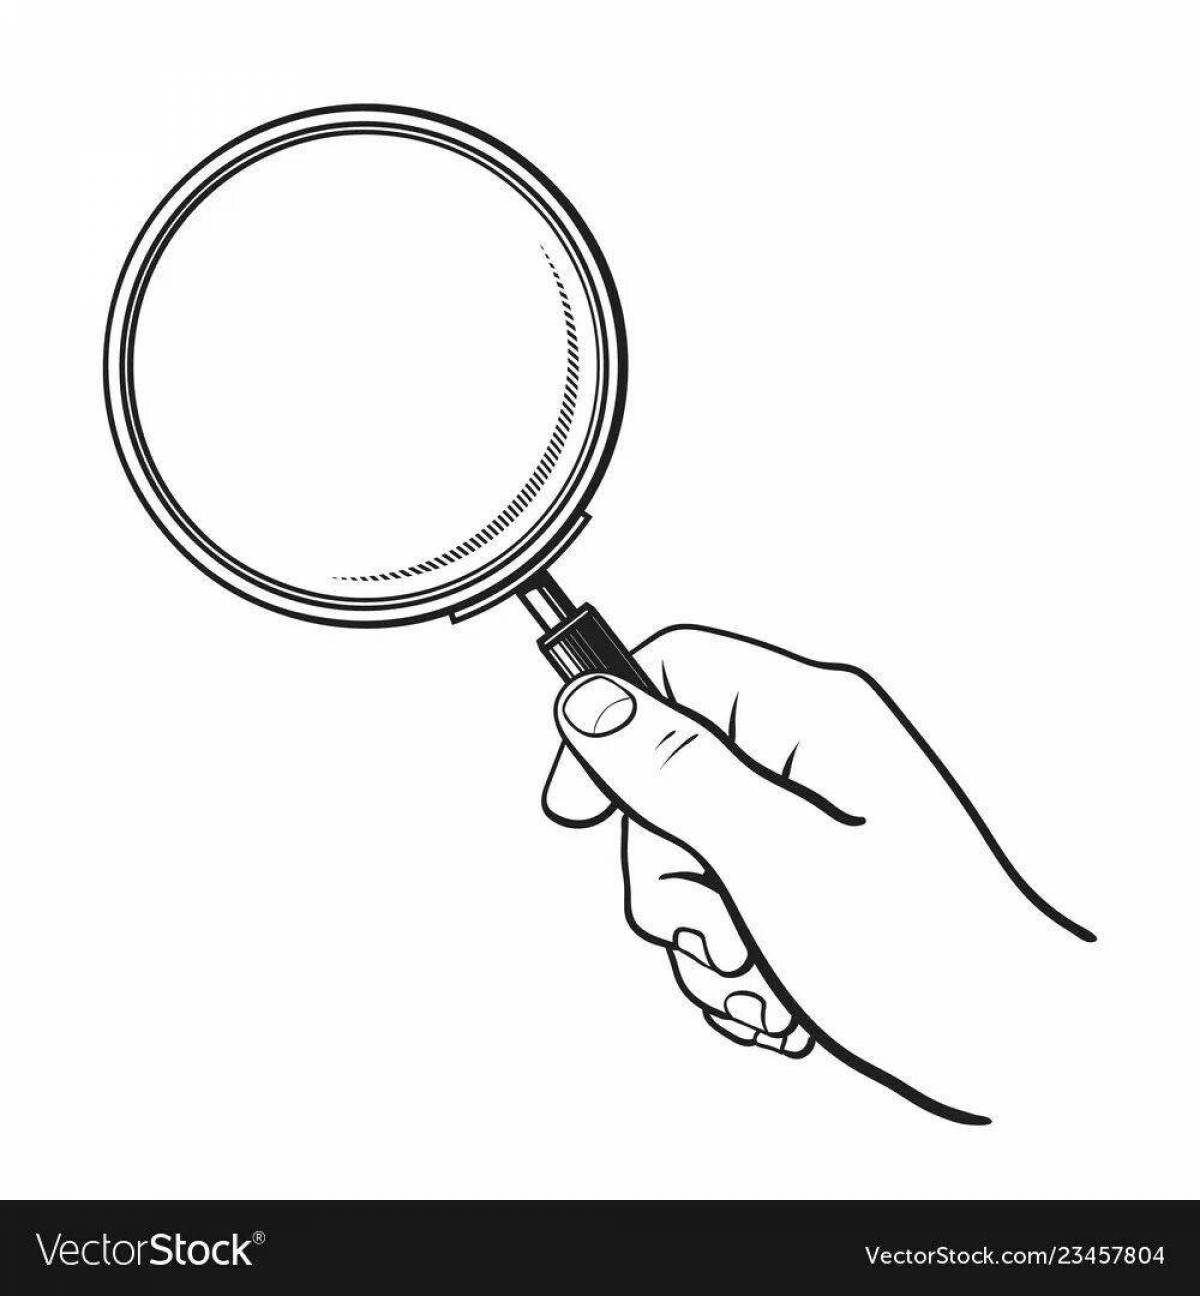 Coloring book with a magnifying glass for babies